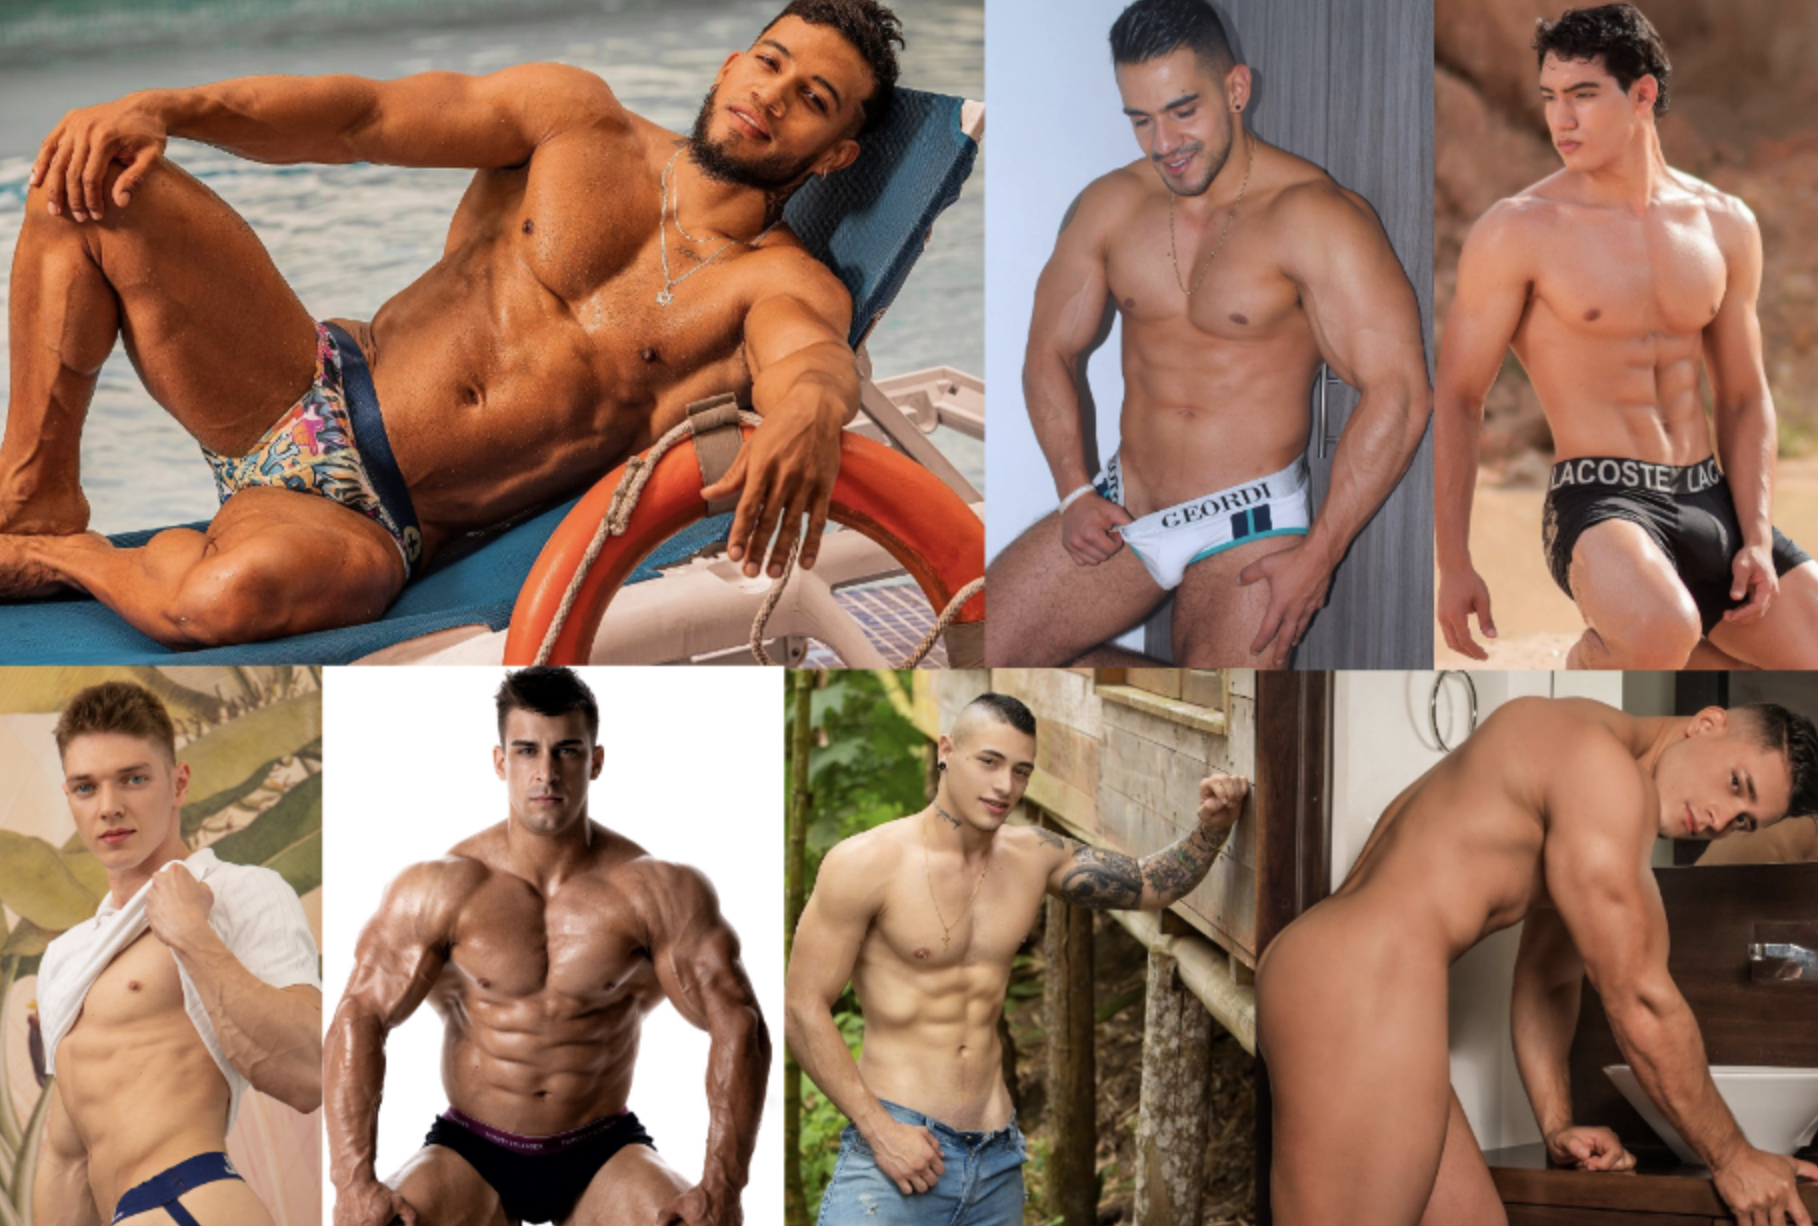 LIST: Here Are Flirt4Free's Top 10 Men Of The Month | STR8UPGAYPORN